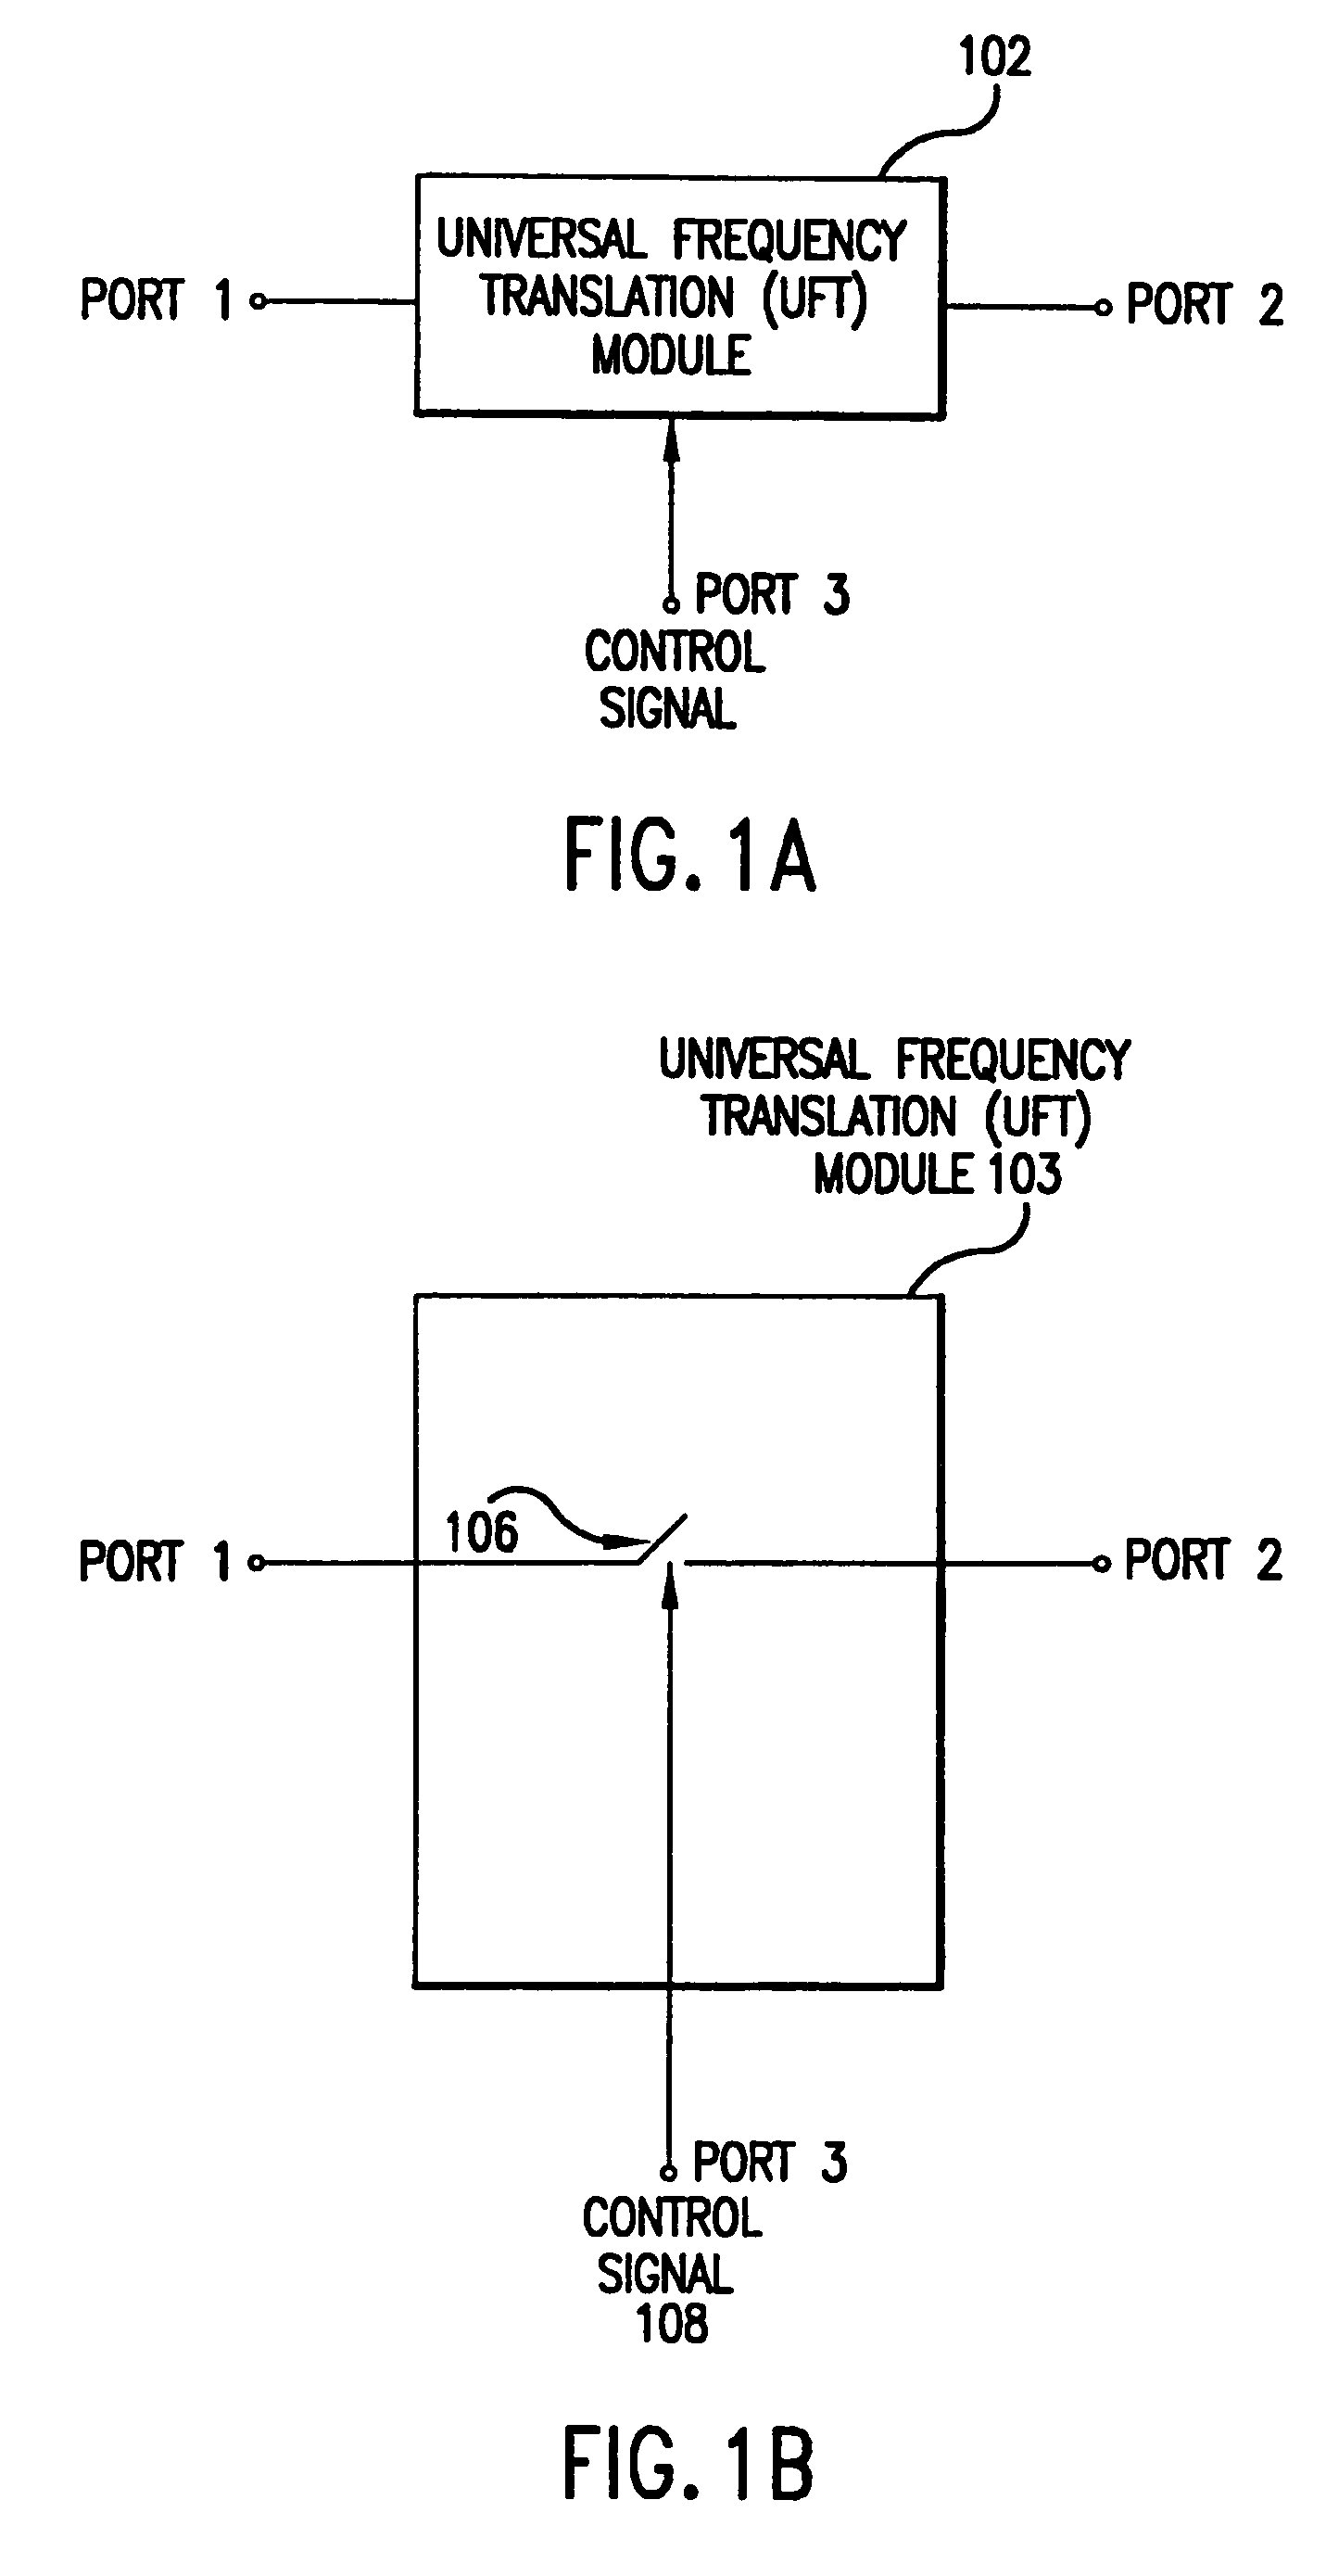 Optical down-converter using universal frequency translation technology